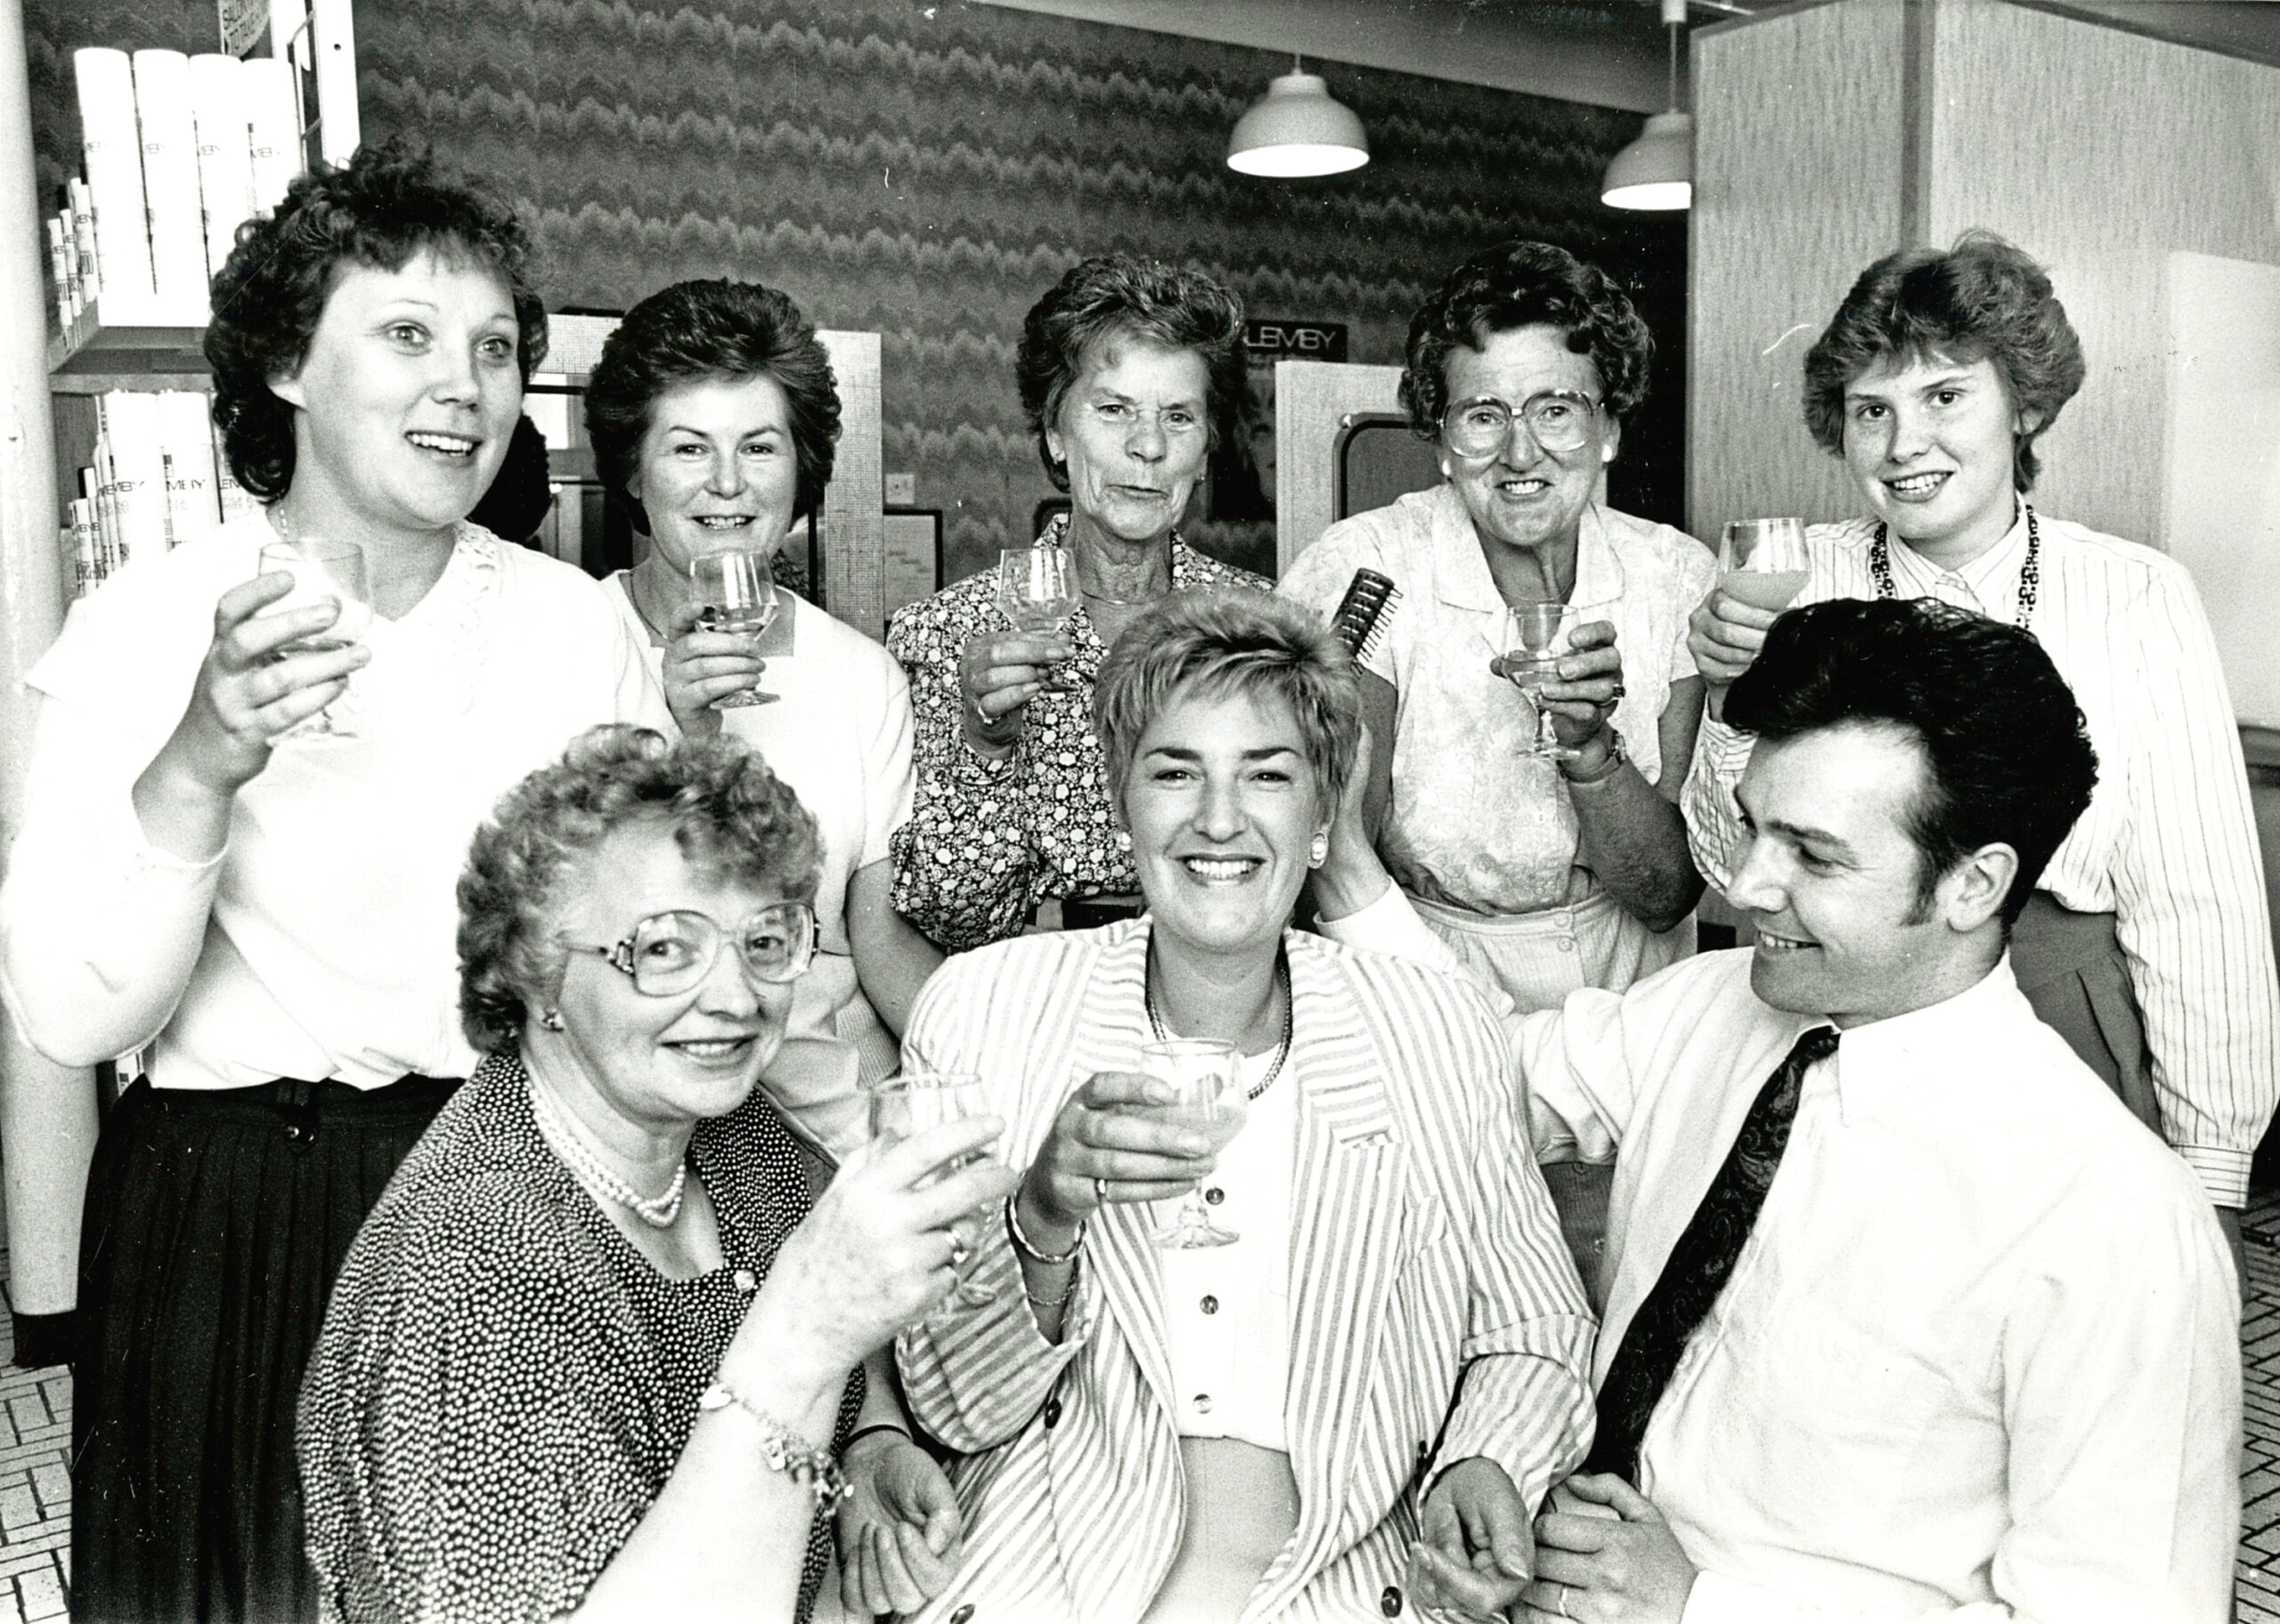 Robert, manager of the Glemby Hair Salon at Esslemont and MacIntosh, poses with regional winners in a national competition showing off their hairdos in 1990.